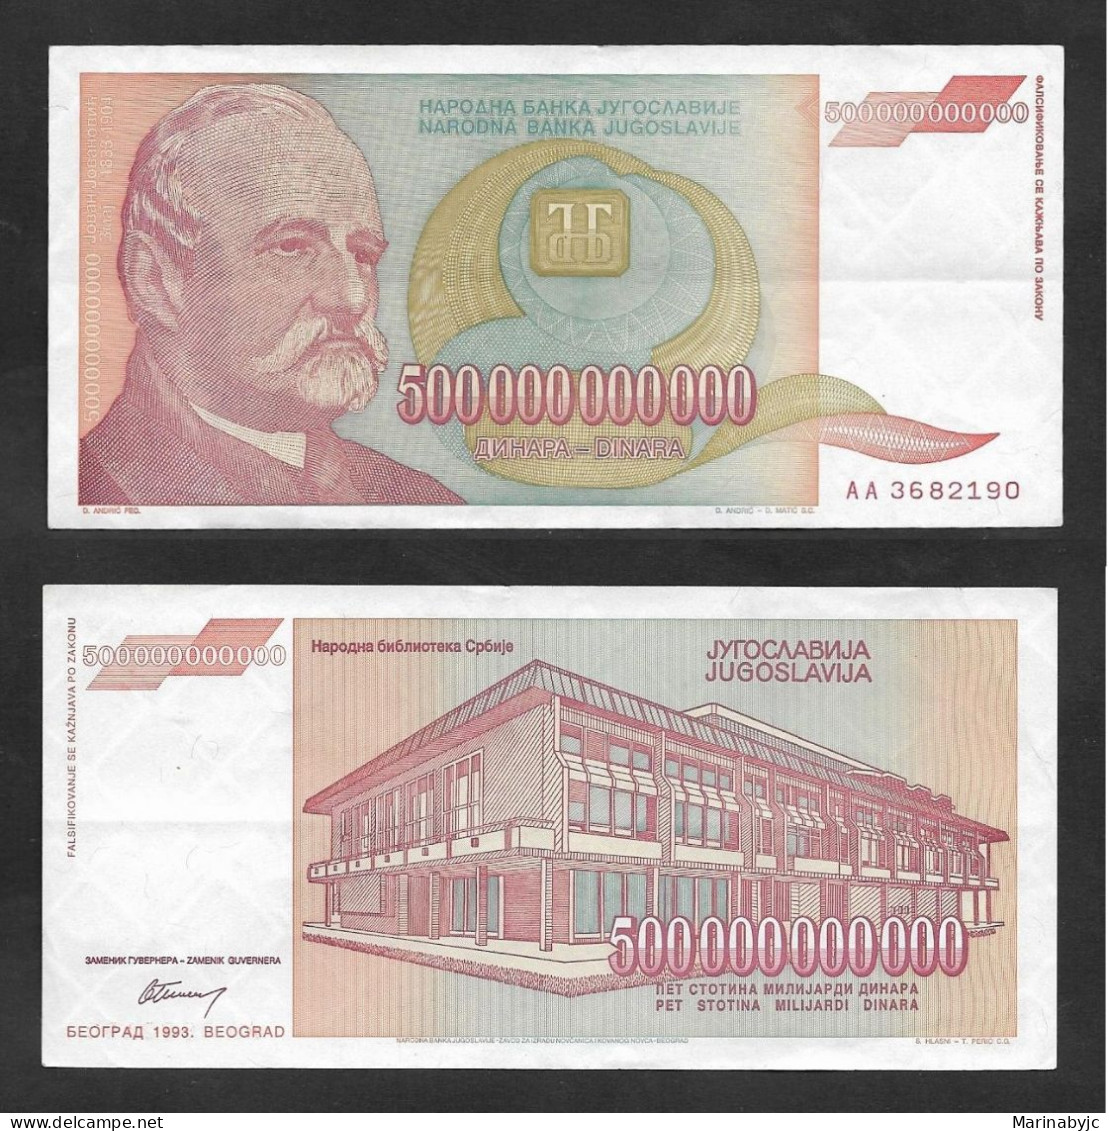 SE)1993 YUGOSLAVIA, BANKNOTE OF 500,000,000,000 DINARS OF THE CENTRAL BANK OF YUGOSLAVIA, WITH REVERSE, VF - Gebraucht